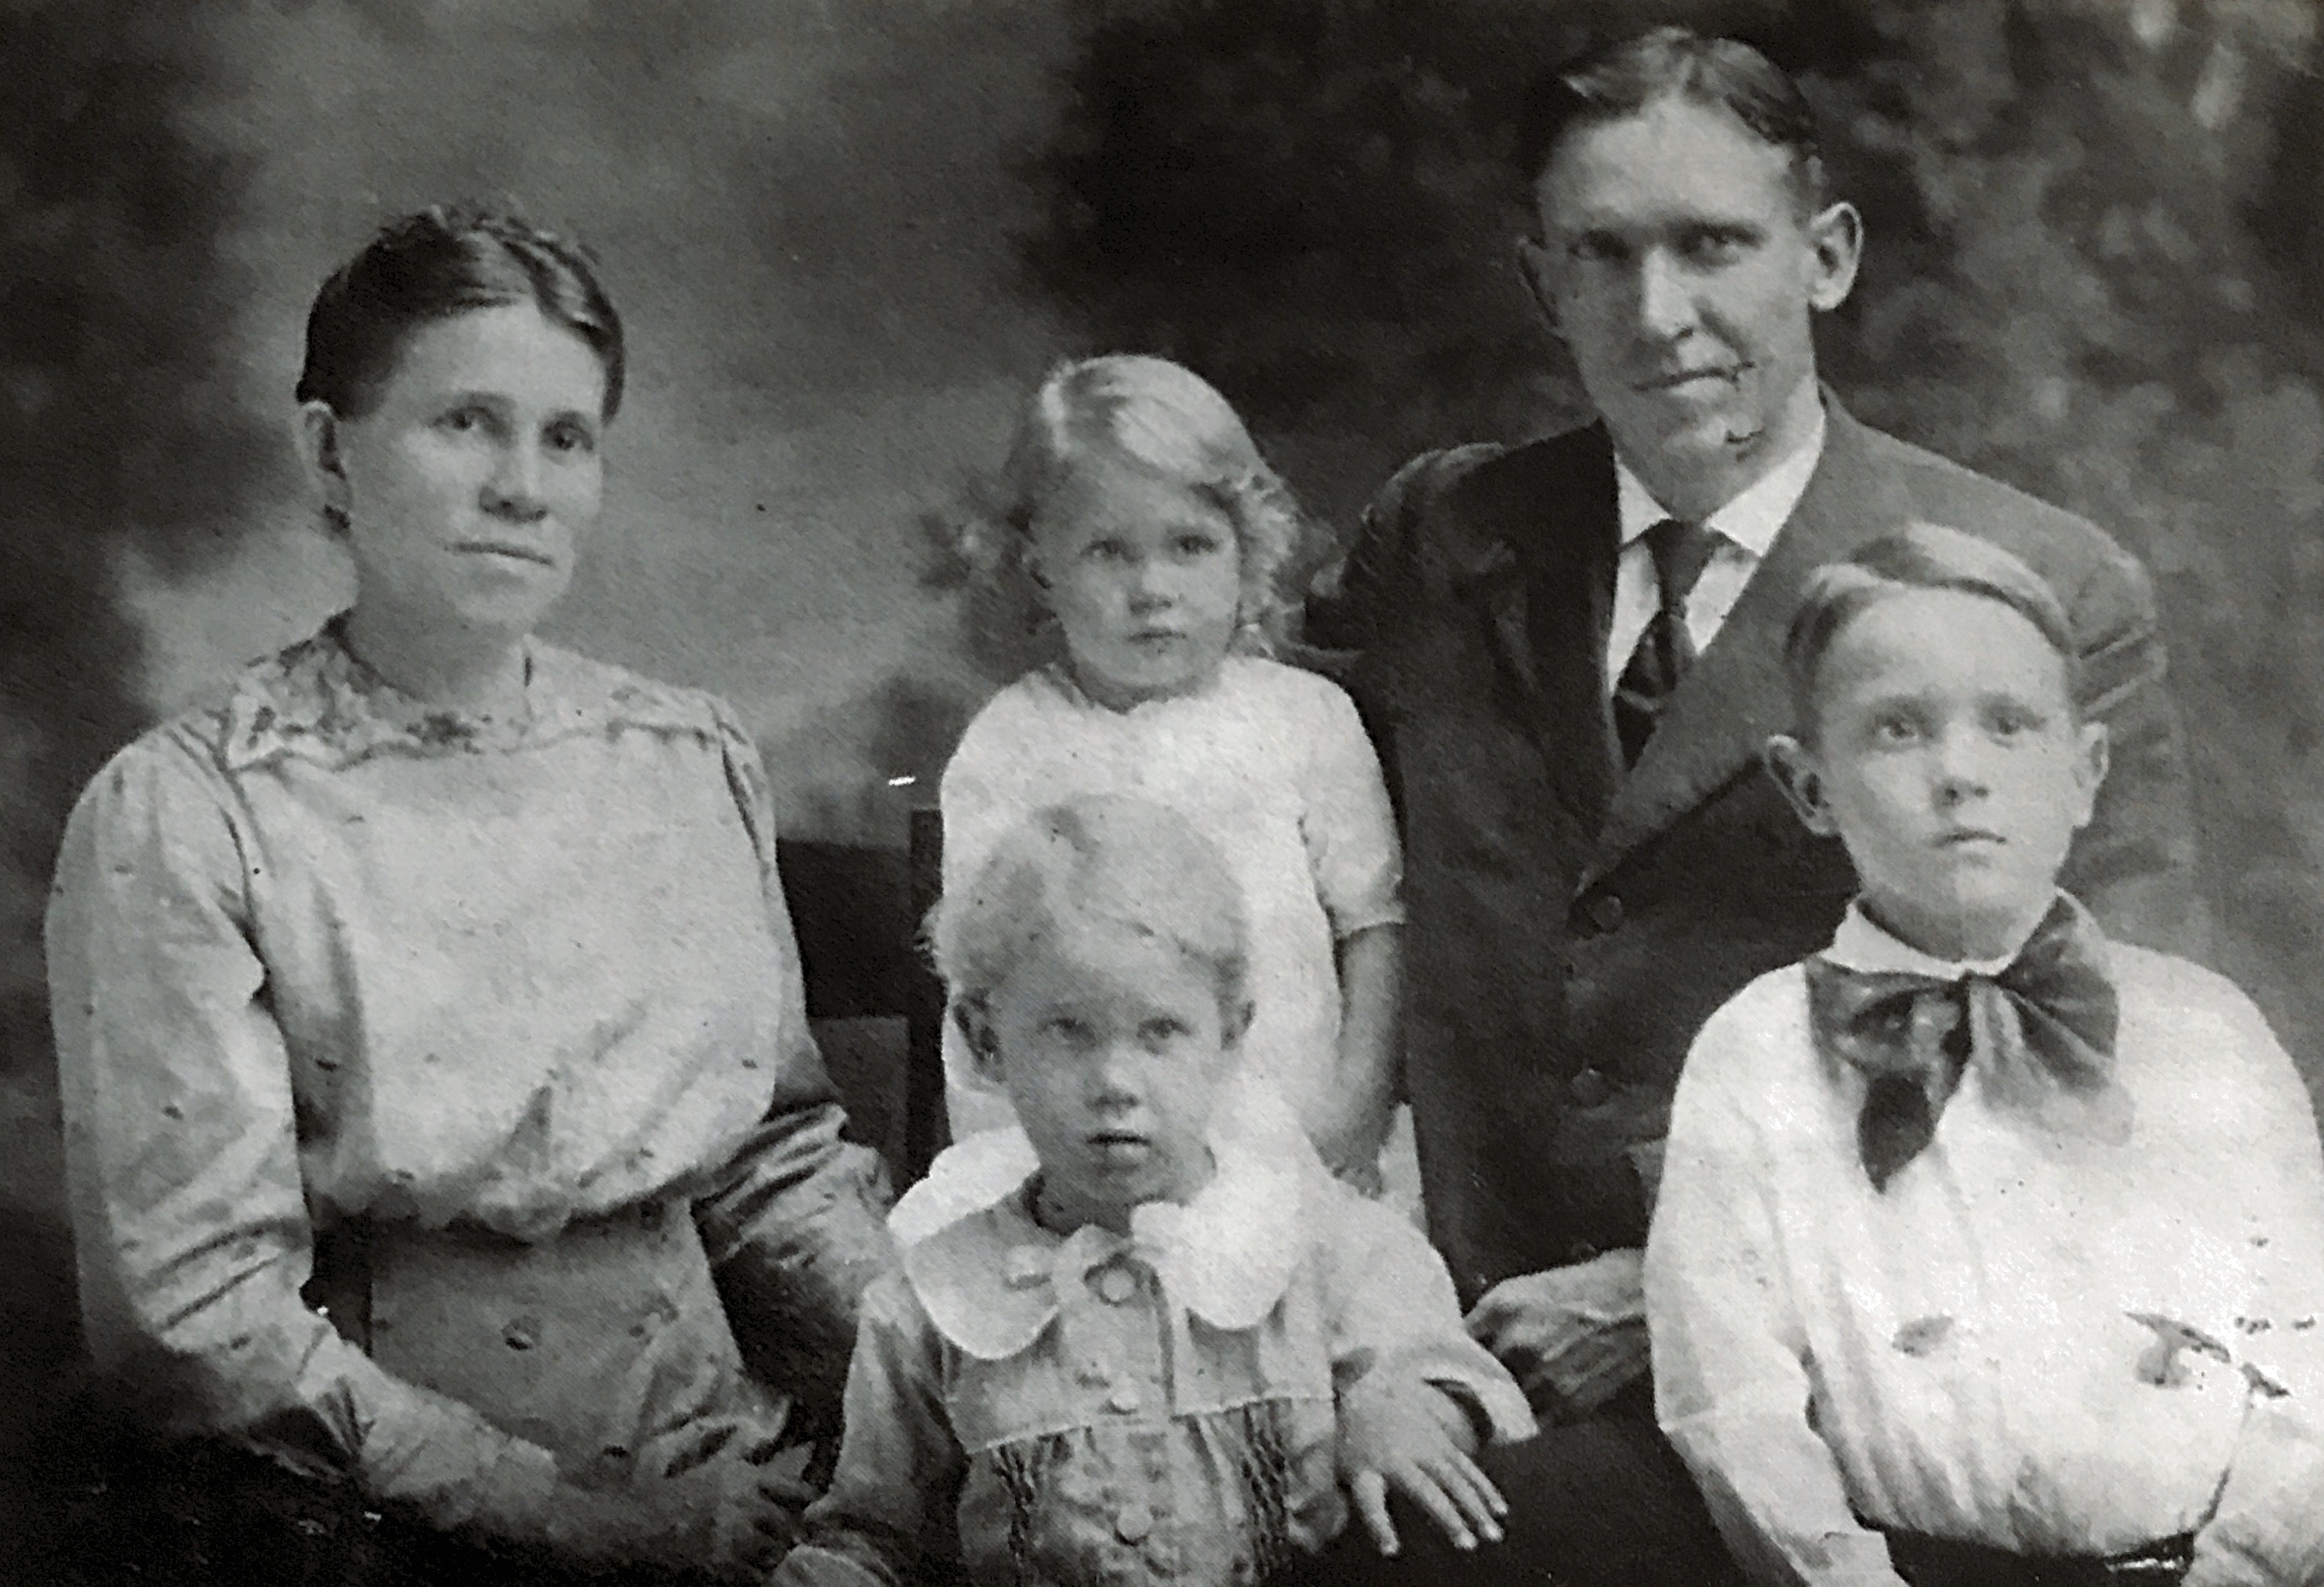 George & Marie Beirnes were missionaries to West Indies & South America in the early 1900’s.